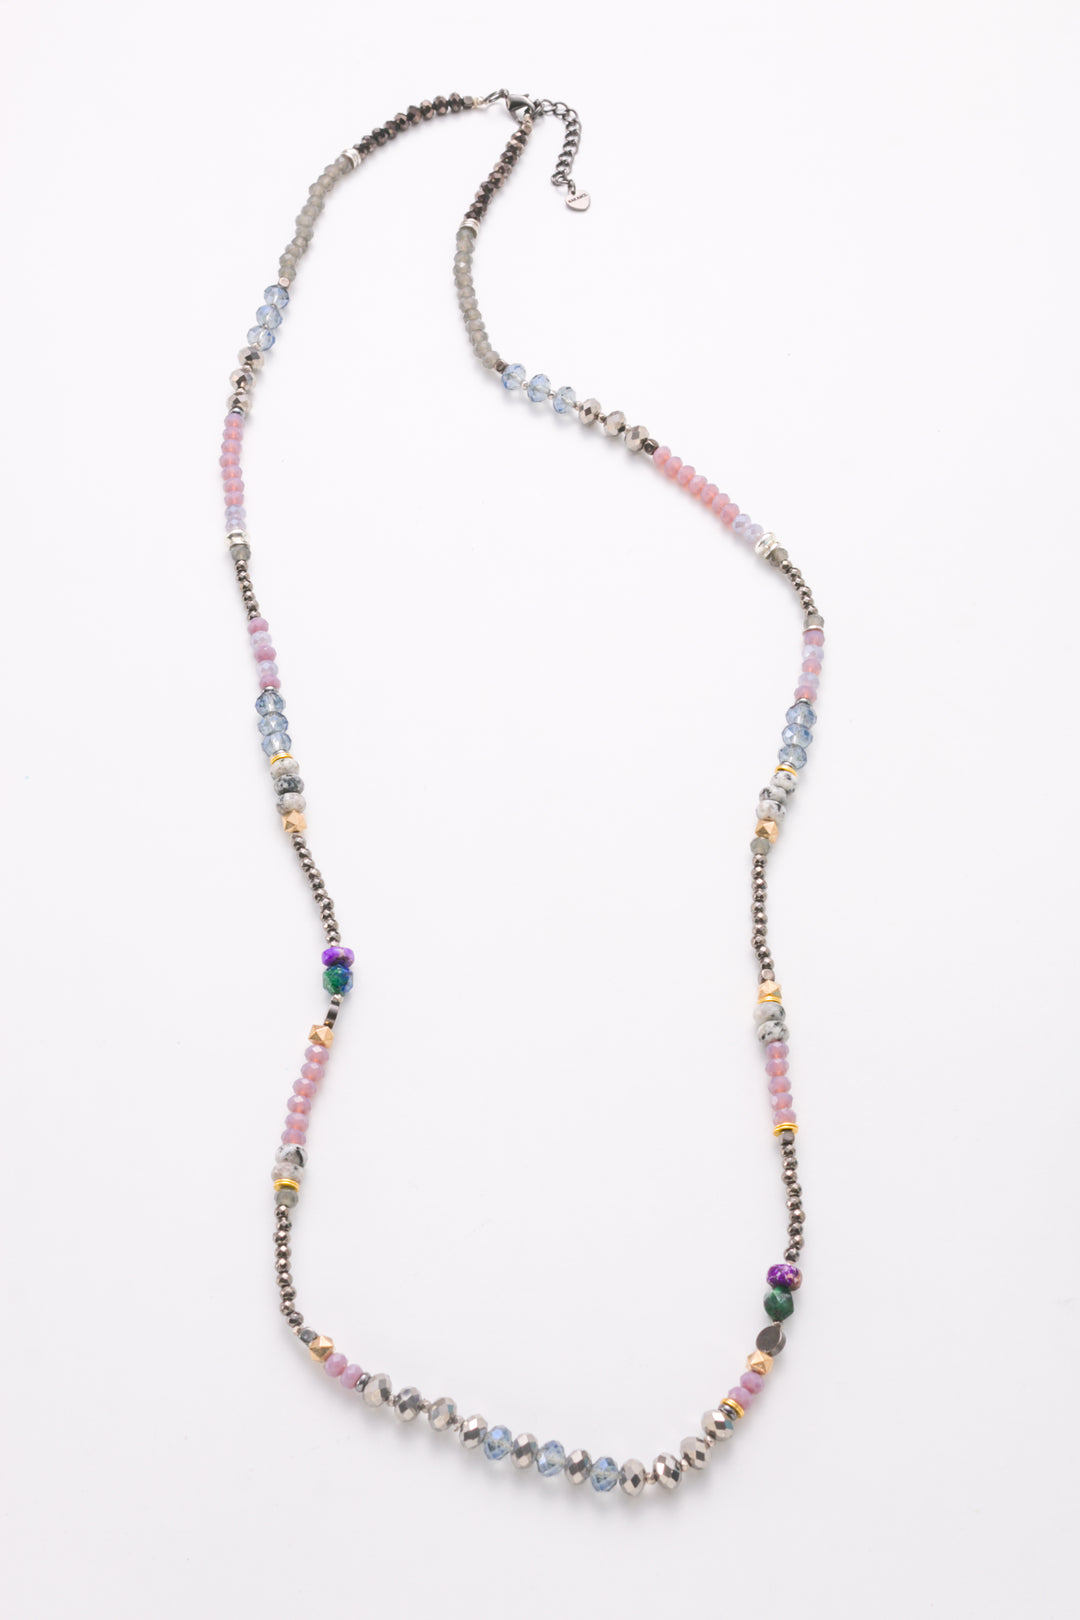 PASTEL MIX LONG BEADED NECKLACE - Kingfisher Road - Online Boutique